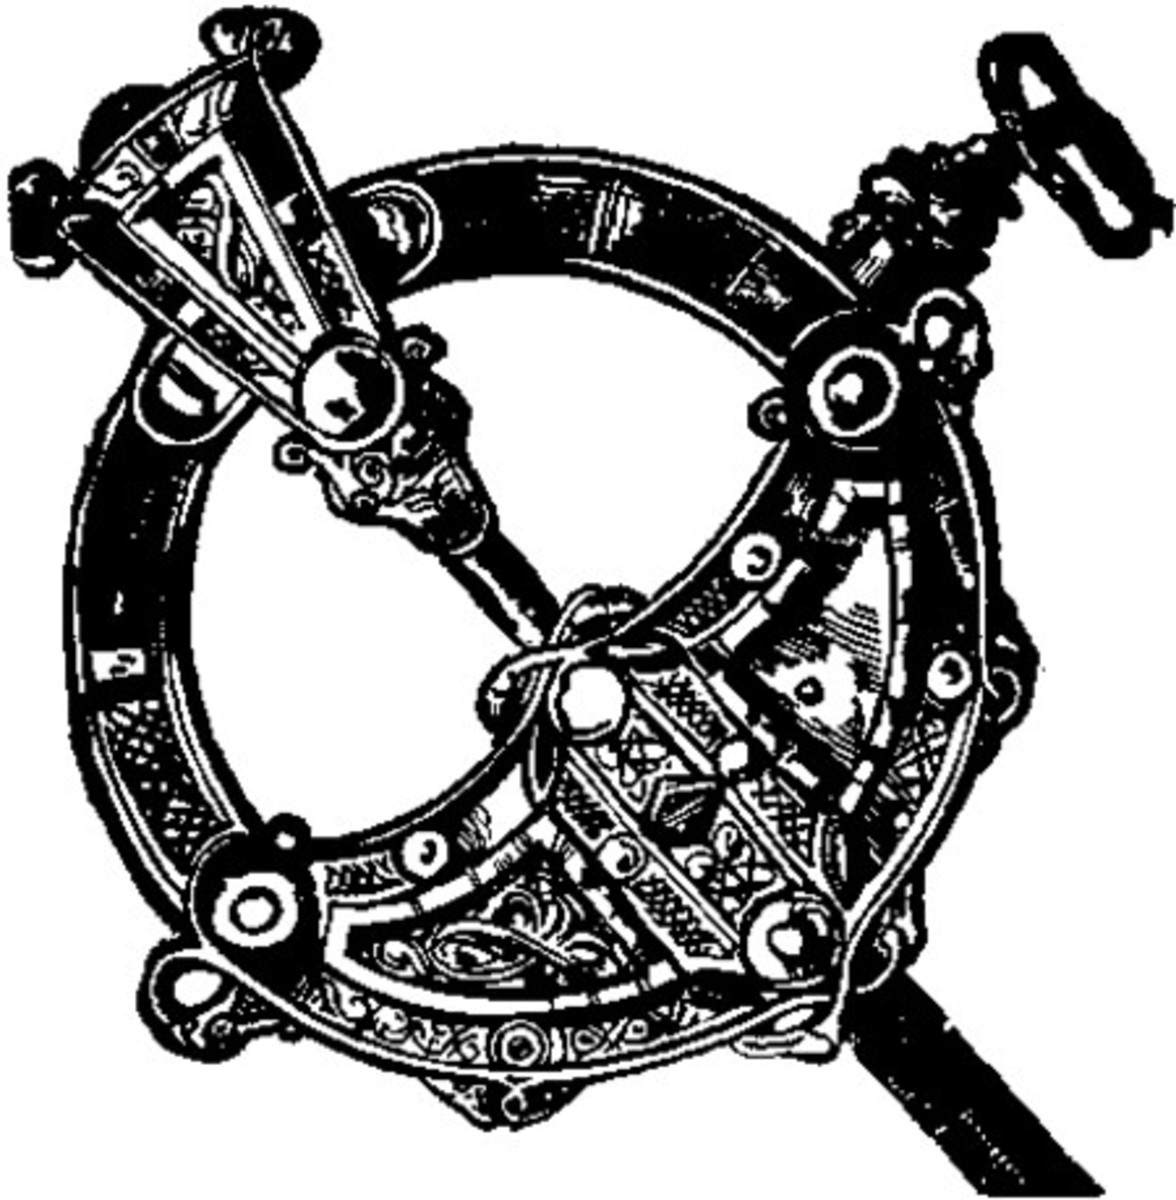 Photographic reproduction of the Tara Brooch. Source: unknown wikicommons.